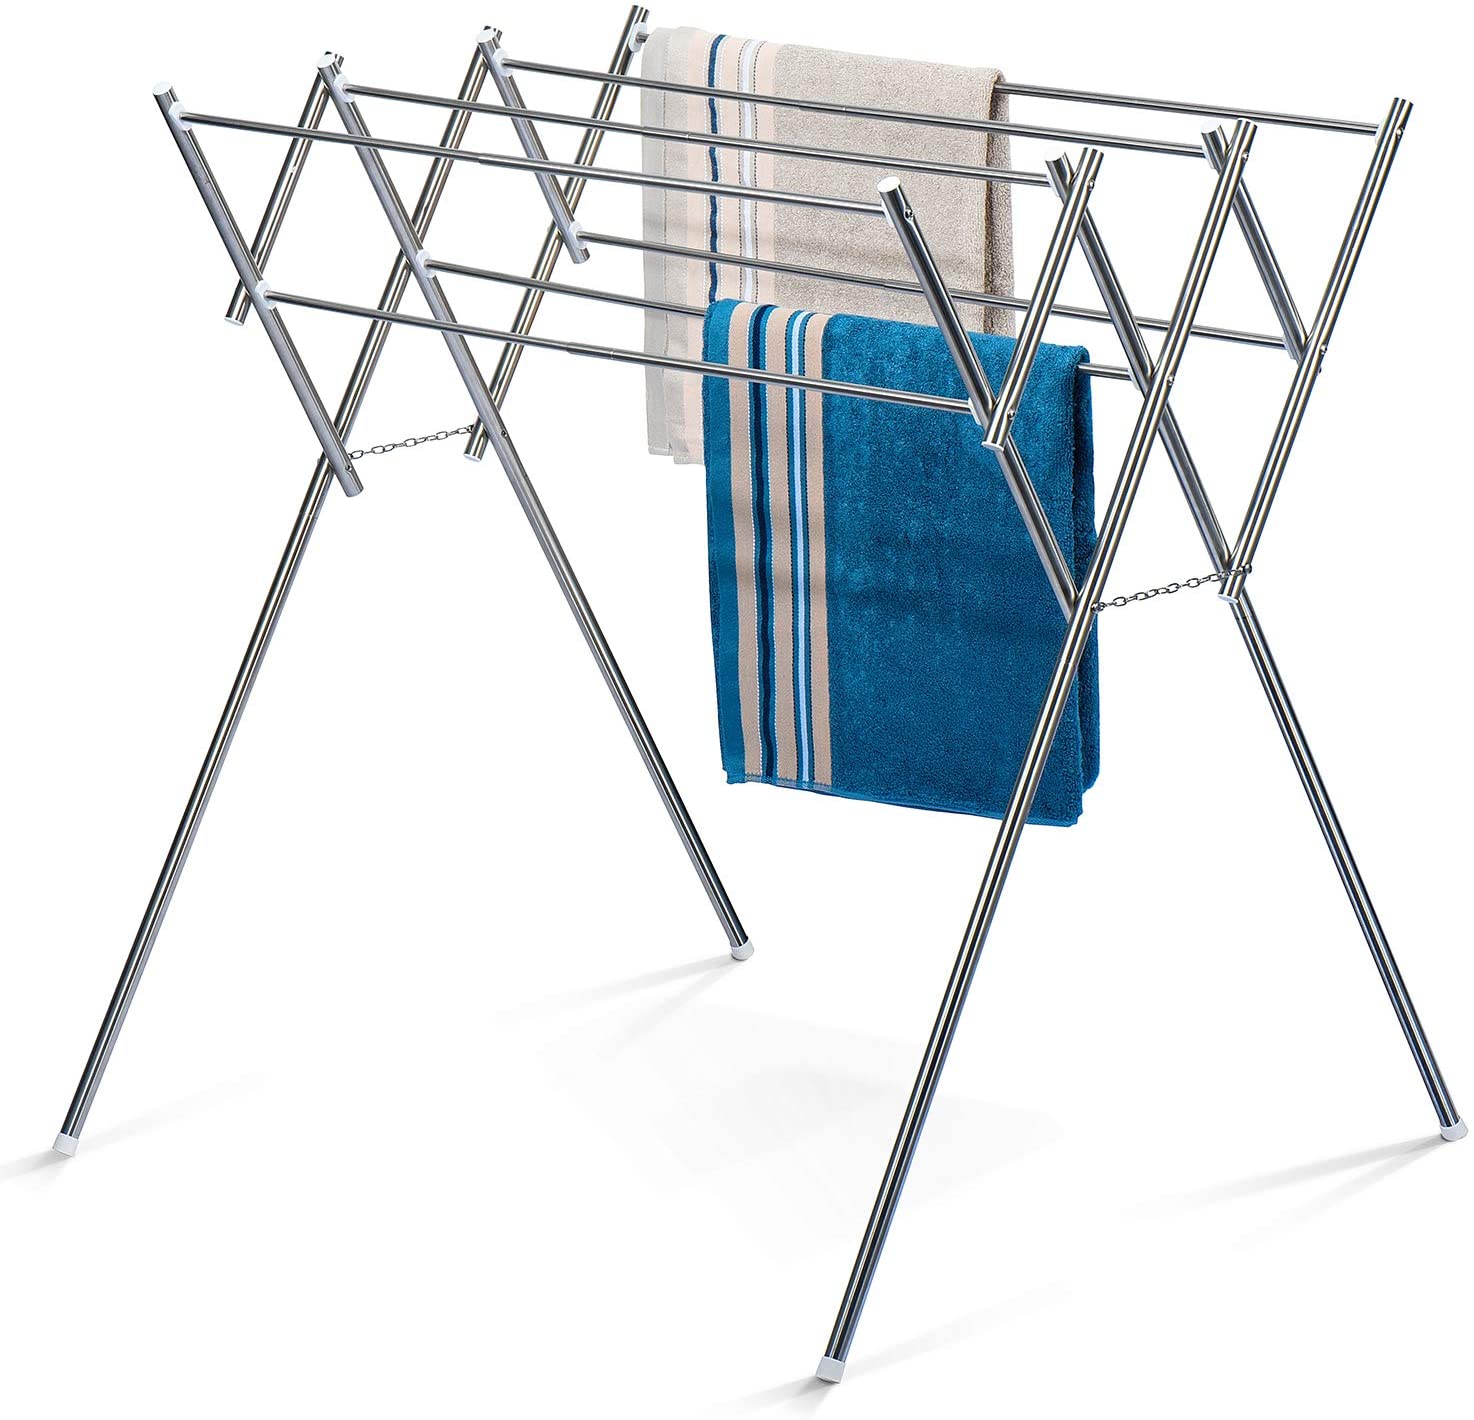 Foldable steel drying rack with 7 drying rods